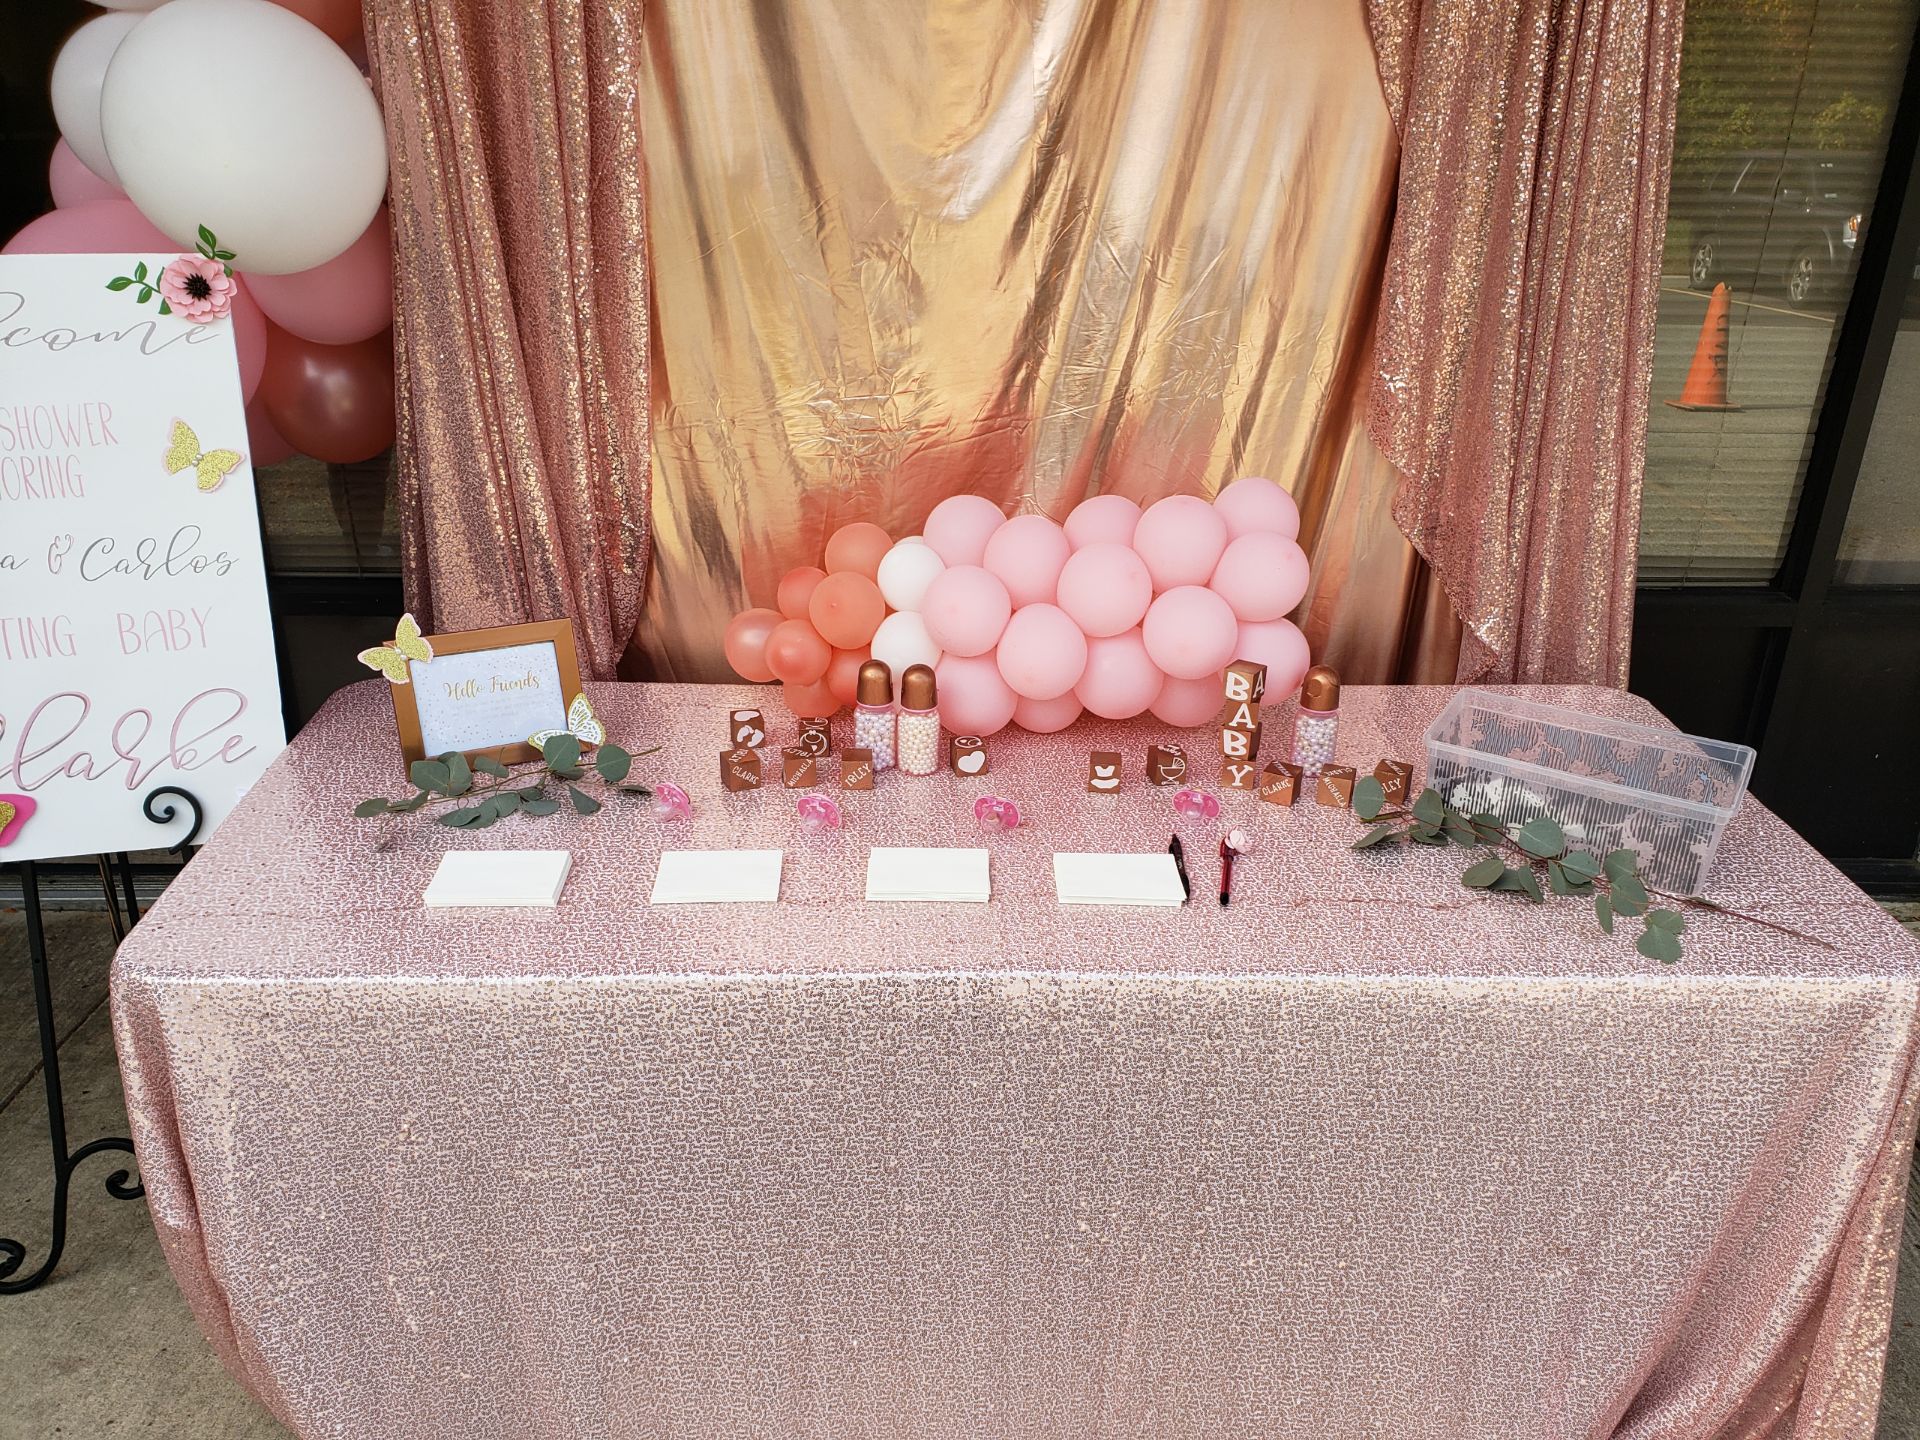 A baby shower setup with a pink and gold theme, featuring a table covered with a glittery cloth, decorated with balloons, a backdrop, and small boxes with labels.